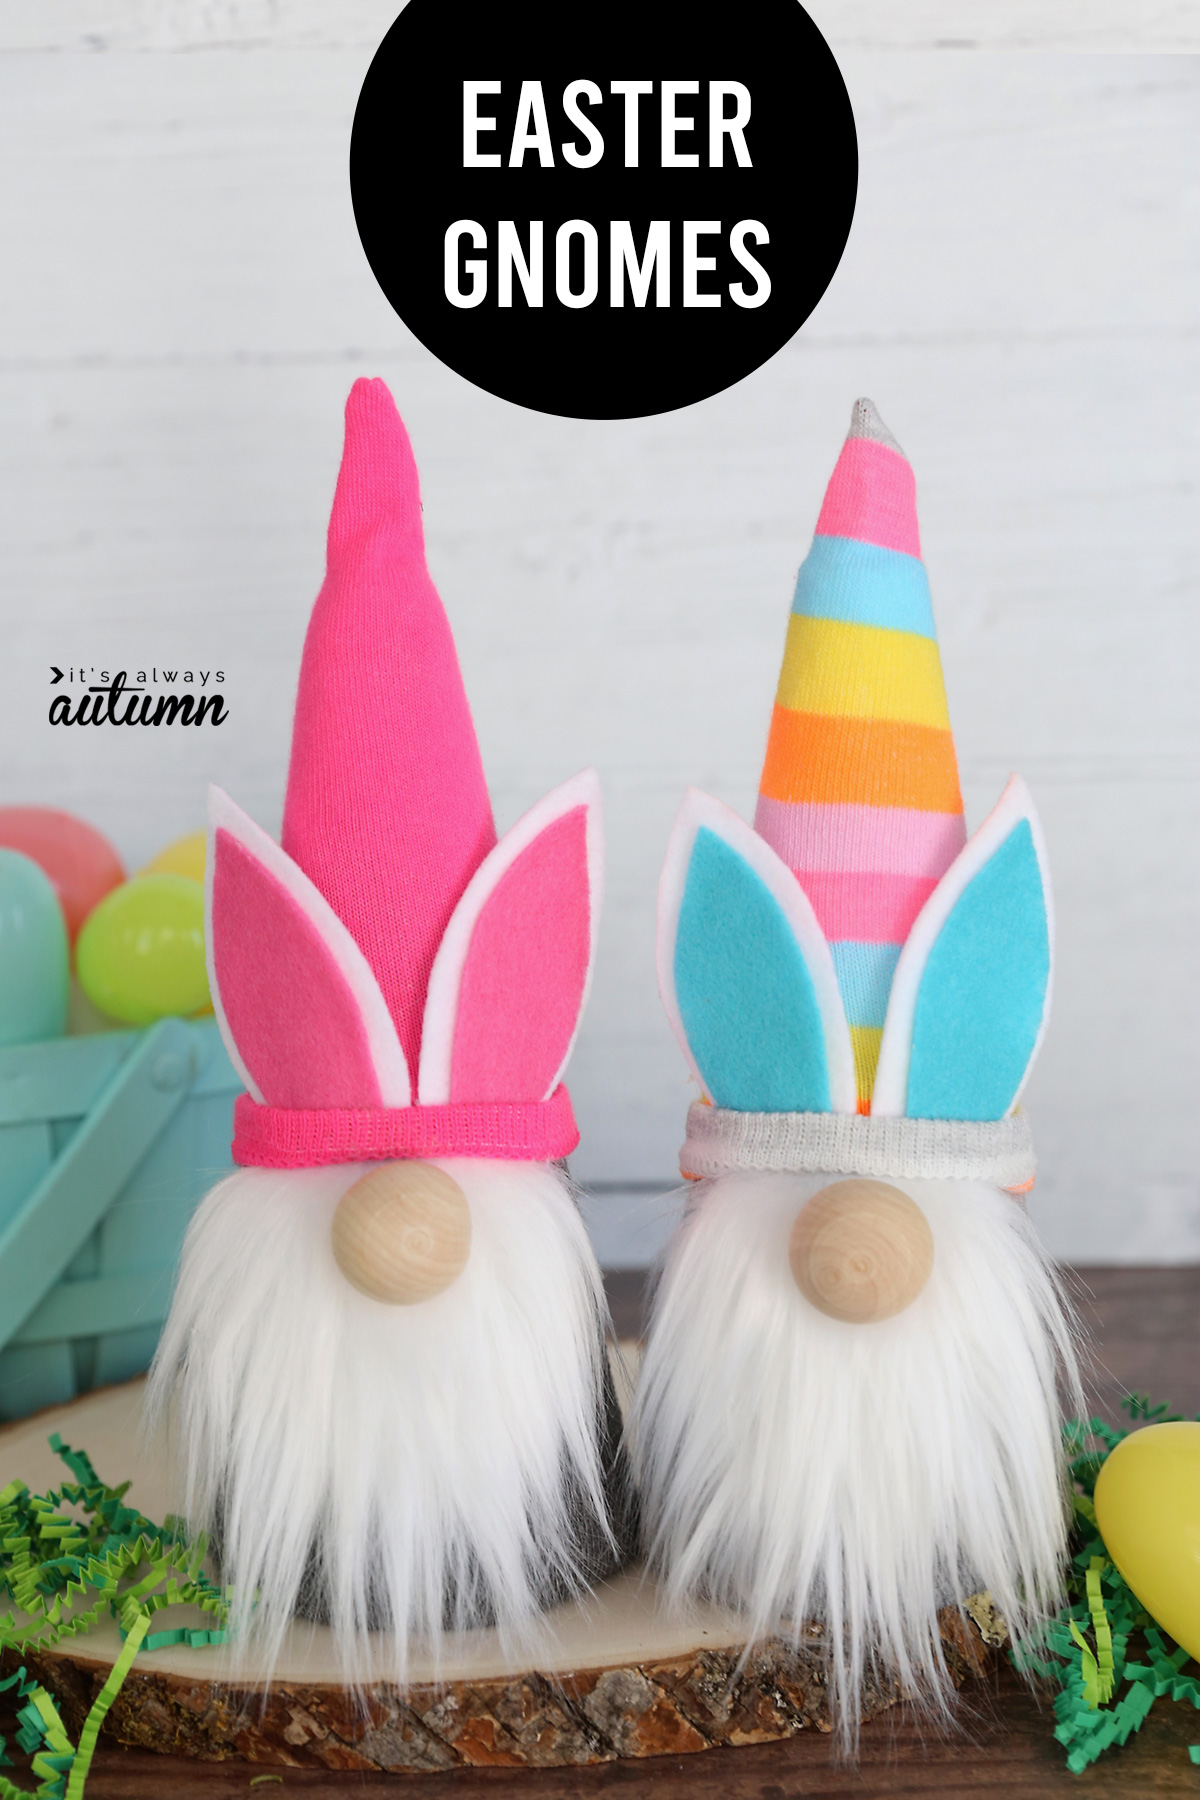 Two sock gnomes with Easter bunny ears and words: Easter gnomes